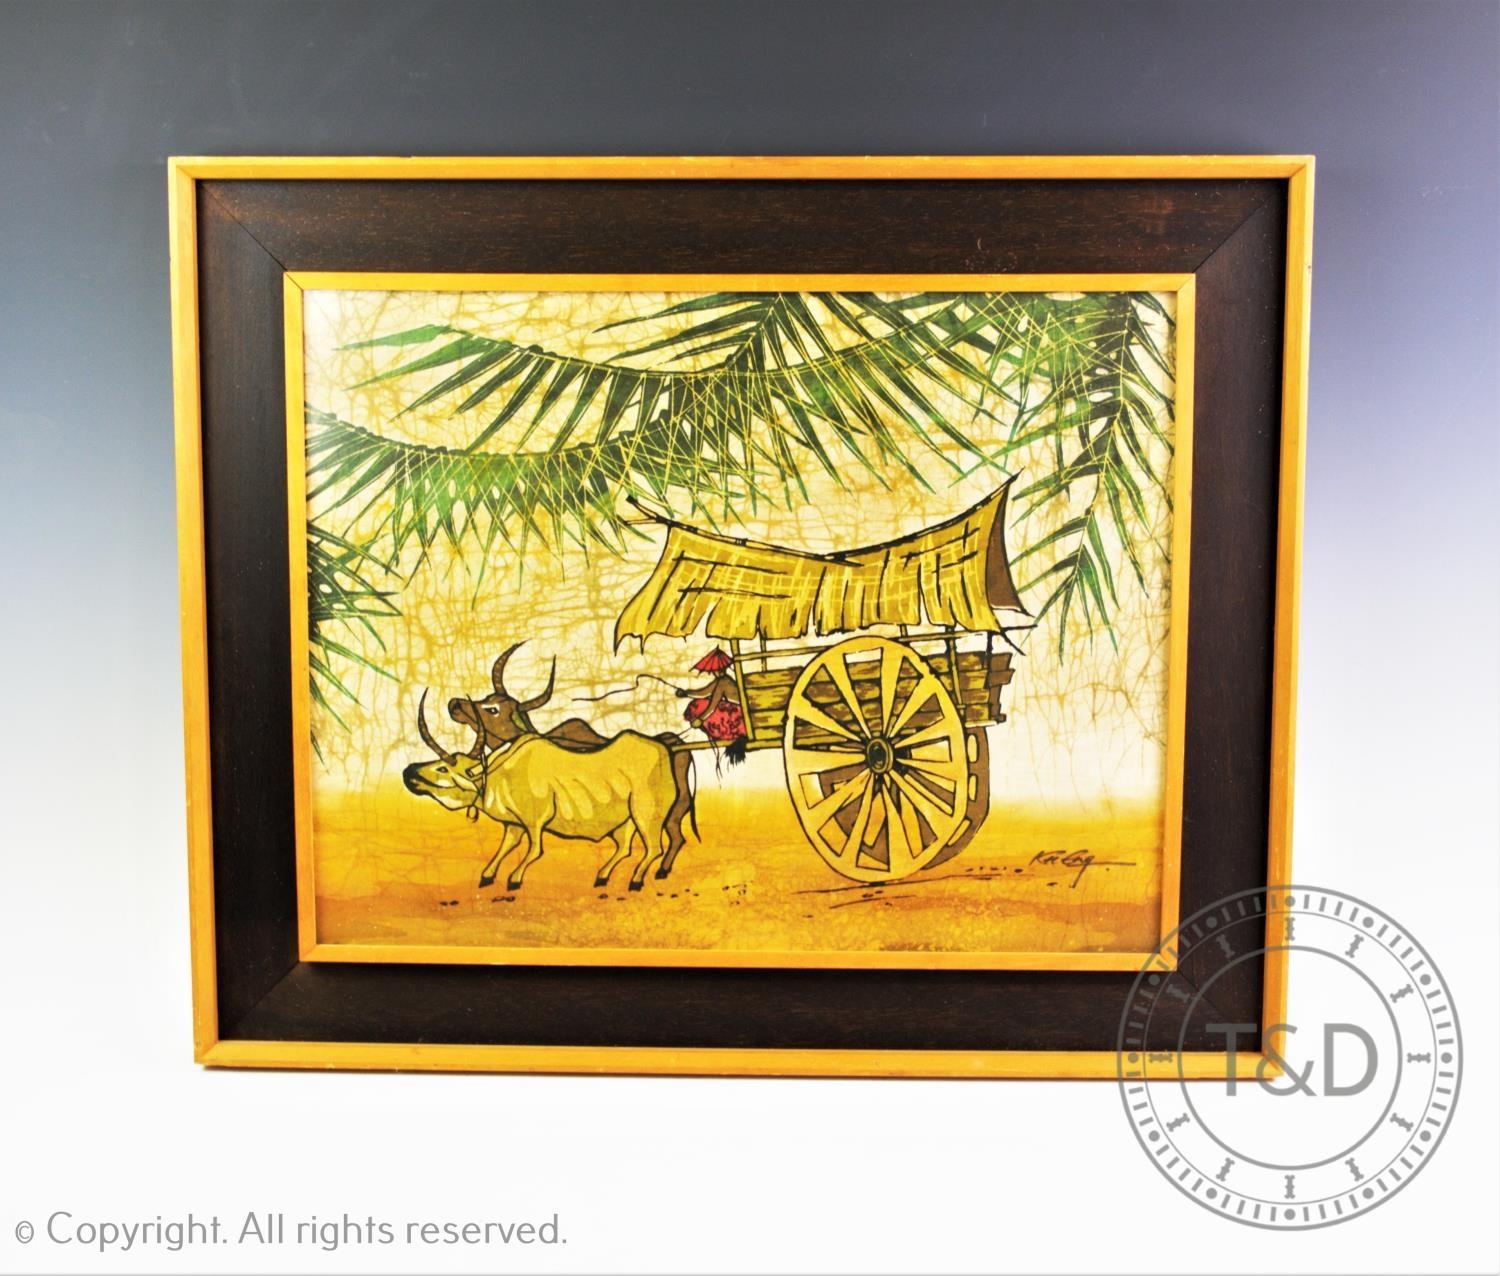 Three vintage south east Asian batik pictures depicting rural and village scenes, in matching glazed - Image 4 of 15